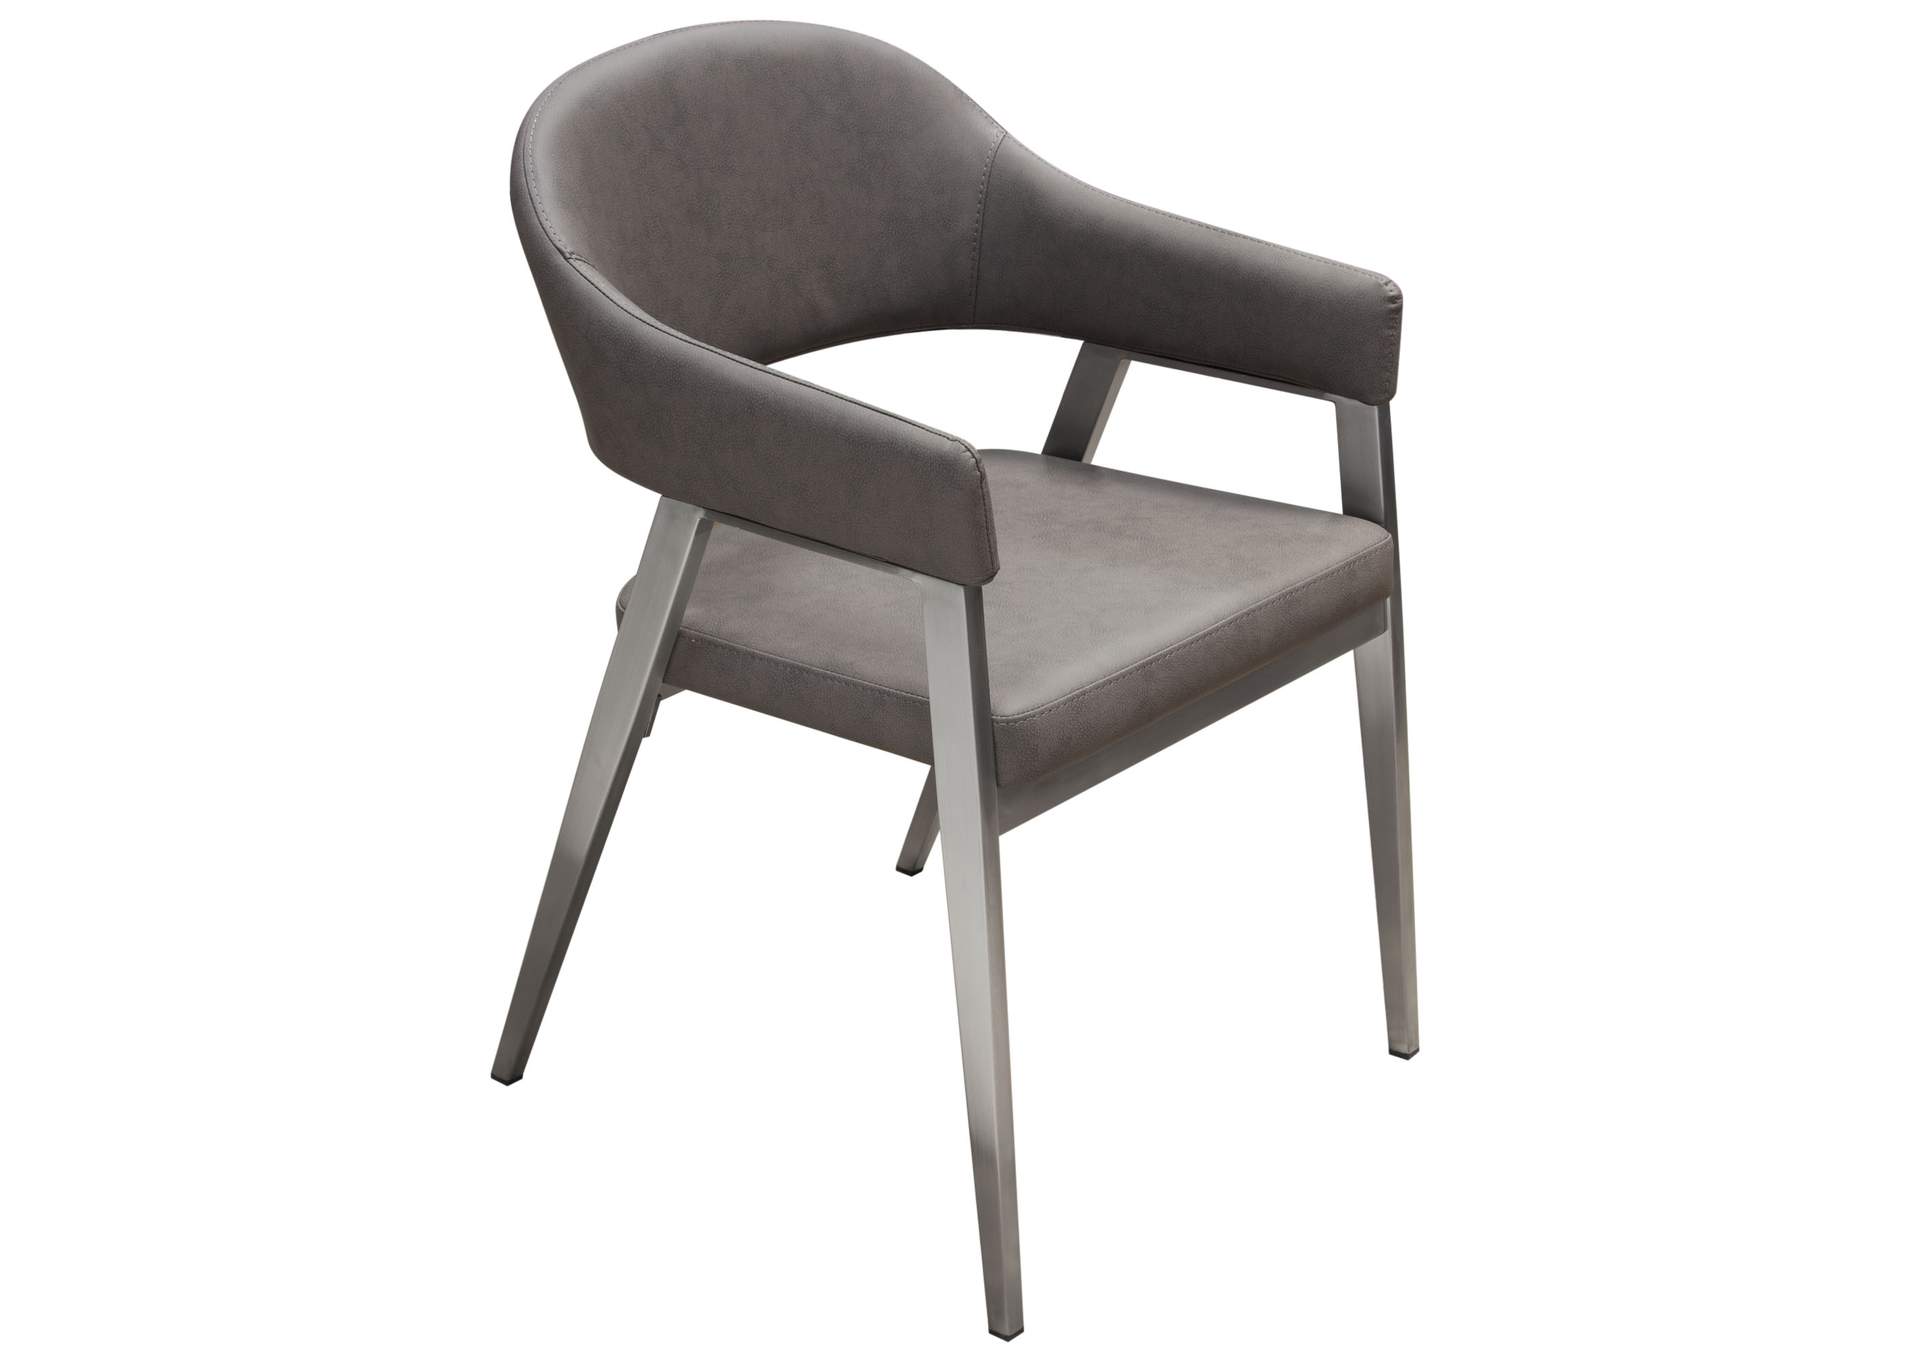 Adele Set of Two Dining/Accent Chairs in Grey Leatherette w/ Brushed Stainless Steel Leg by Diamond Sofa,Diamond Sofa